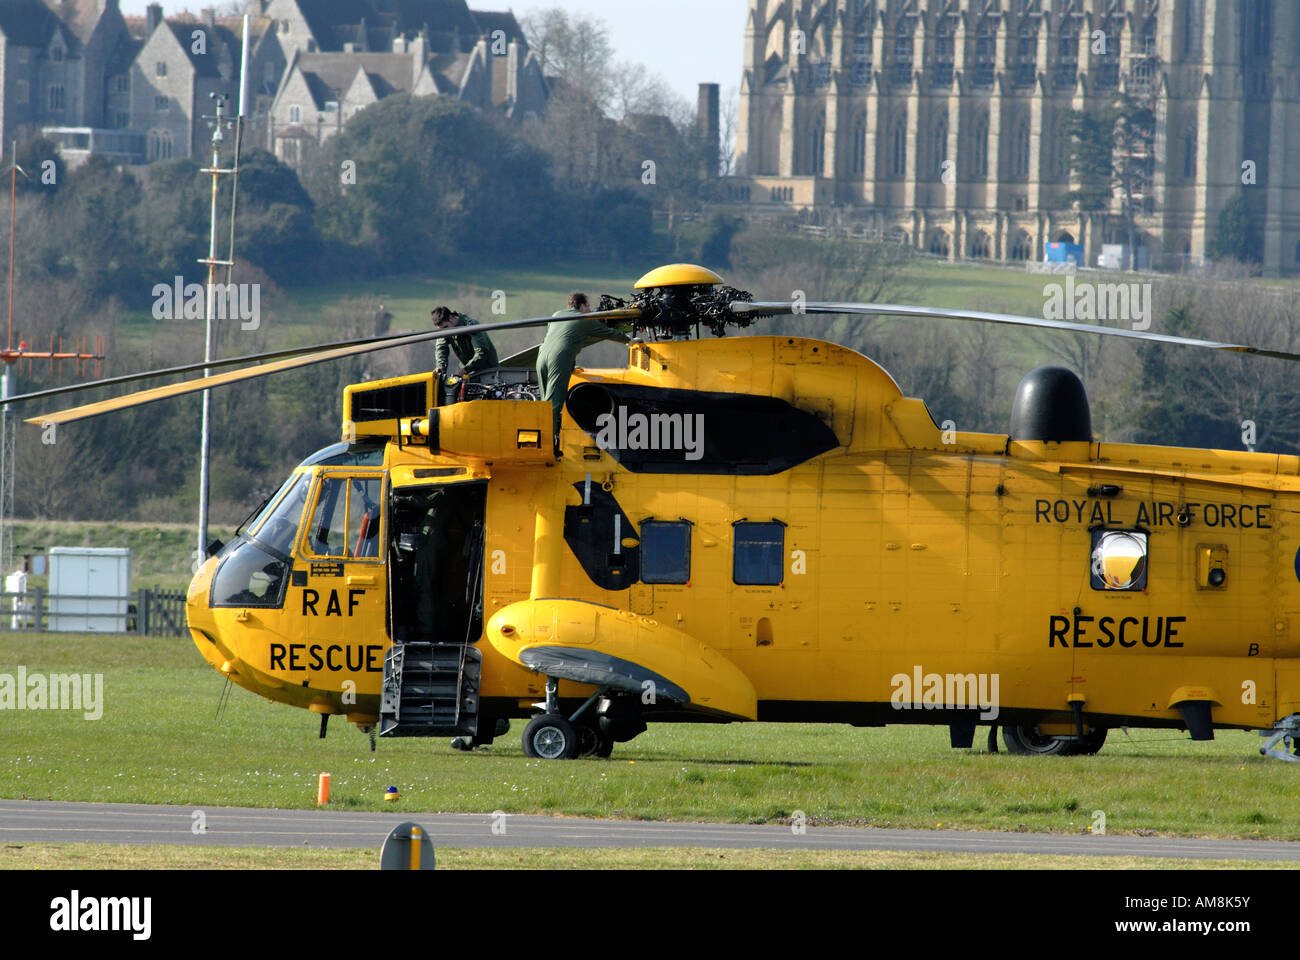 RAF westland 'air sea rescue' helicopter refuleling at Shorham (Brighton City) Airport Stock Photo